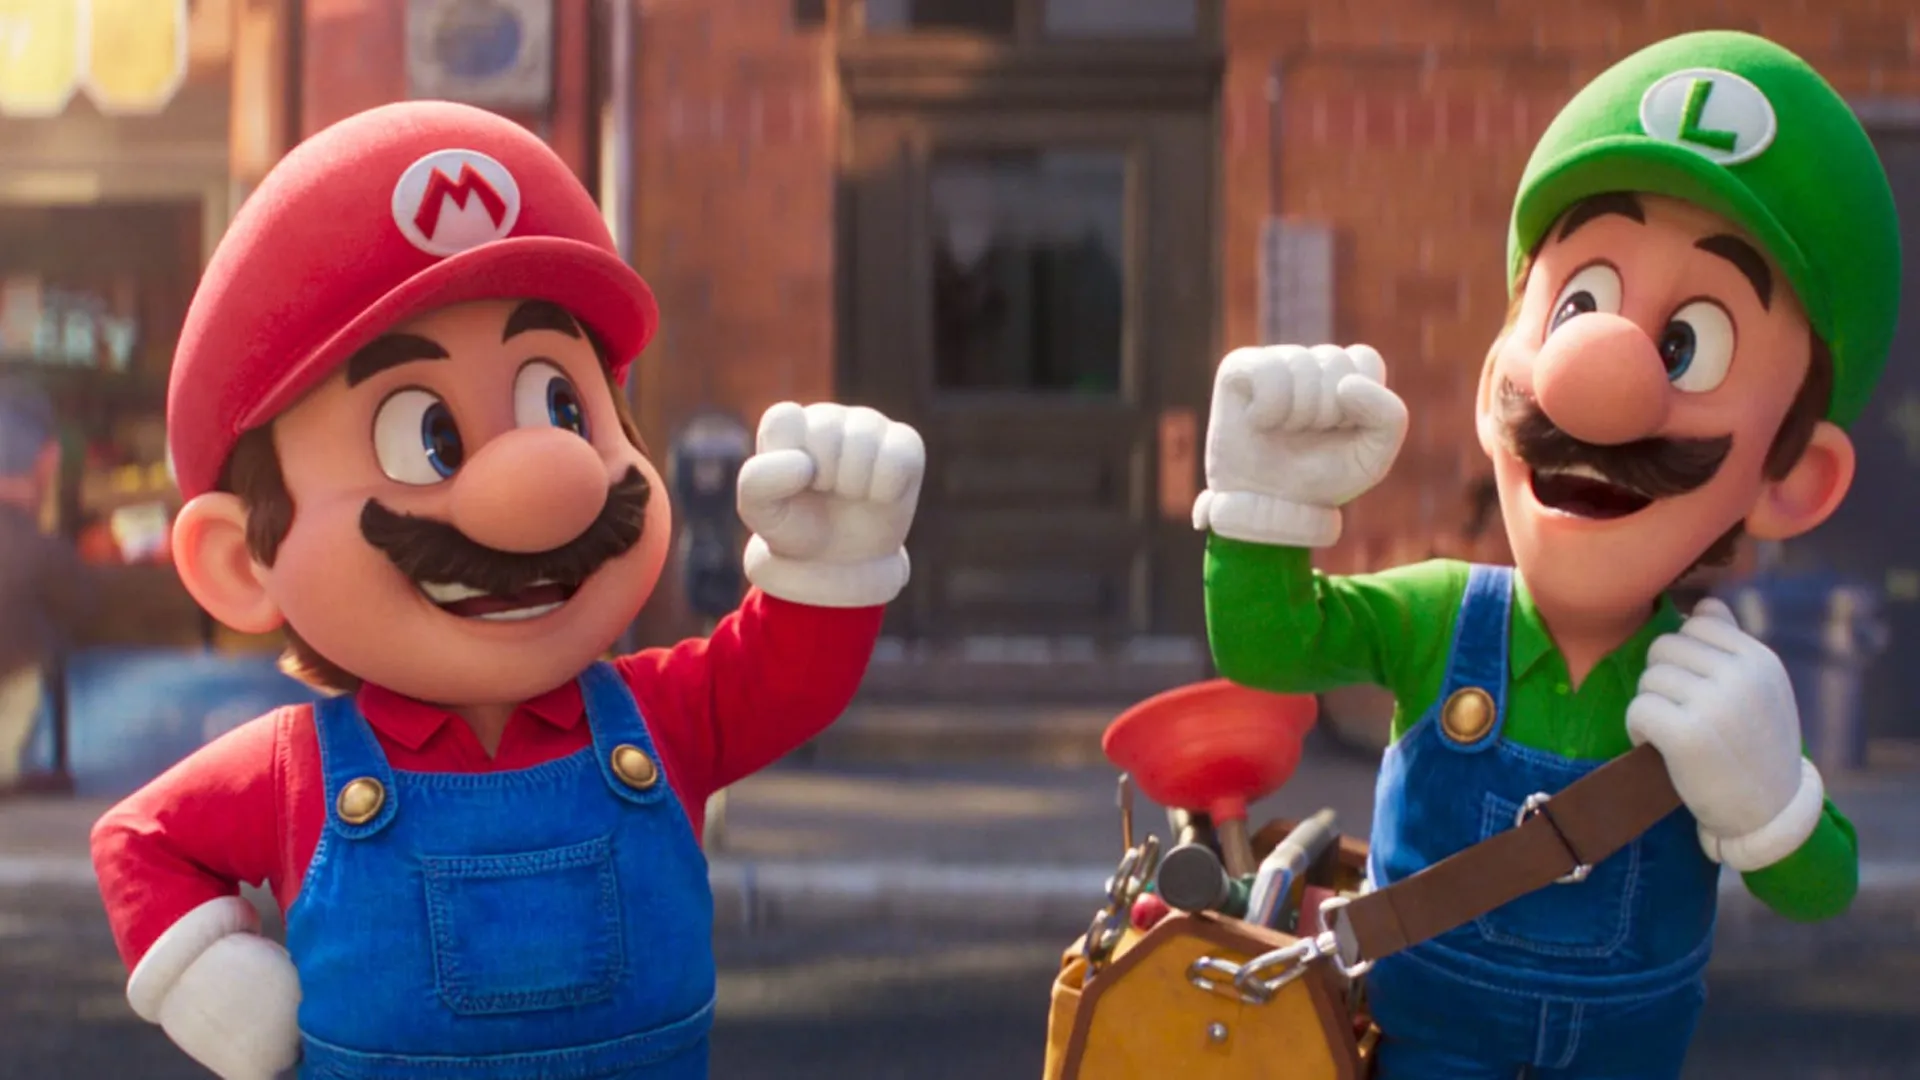 New The Super Mario Bros. Movie TV Spot Introduces Donkey Kong